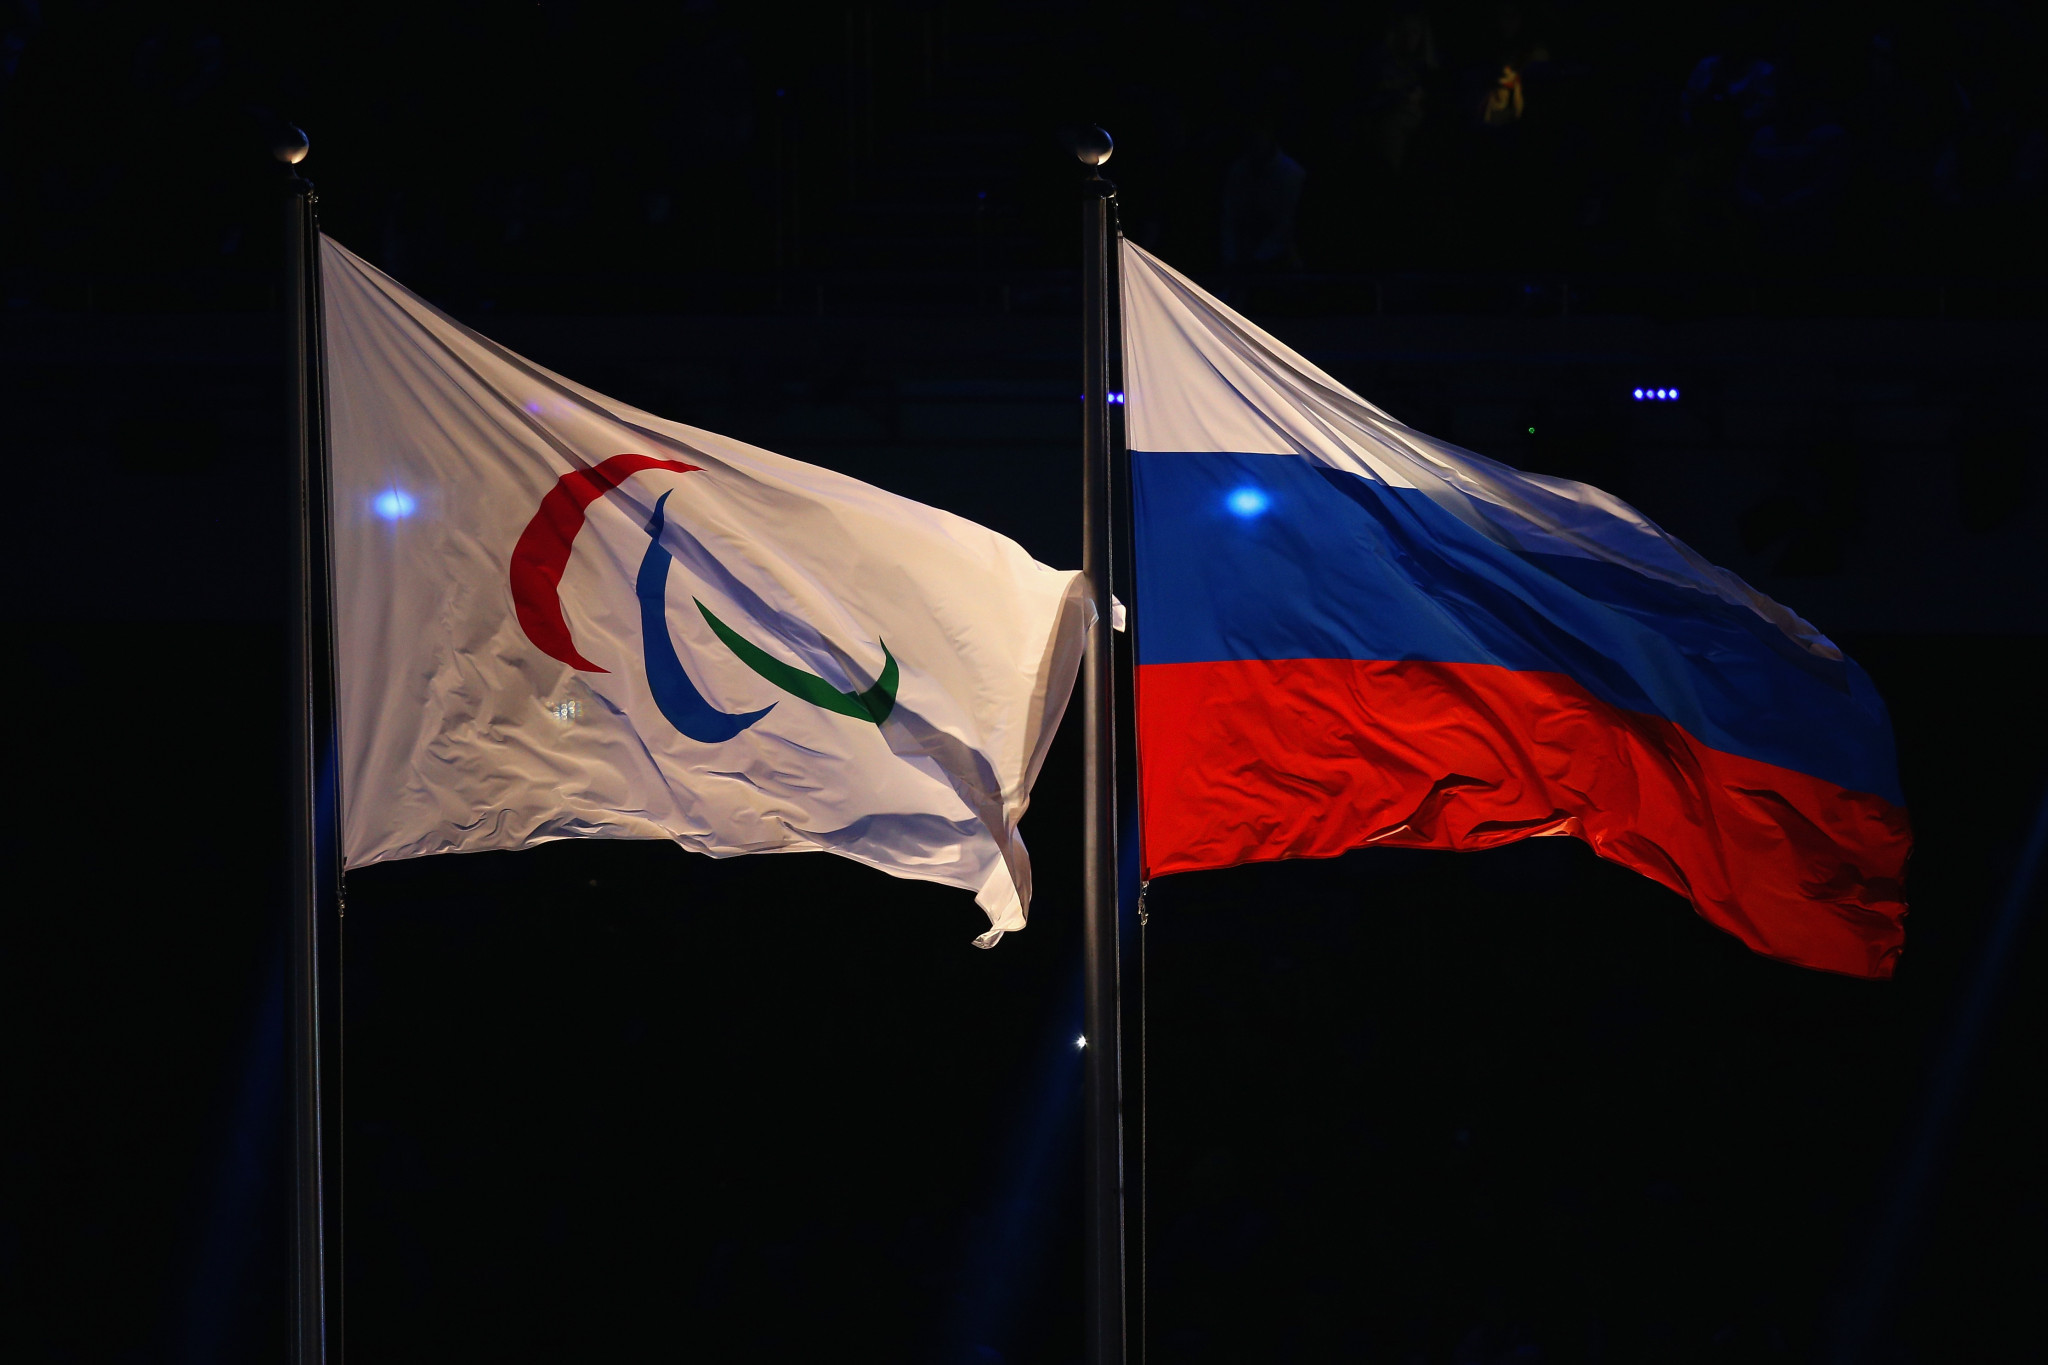 Russia and Belarus set to compete as neutrals at Paris 2024 Paralympics